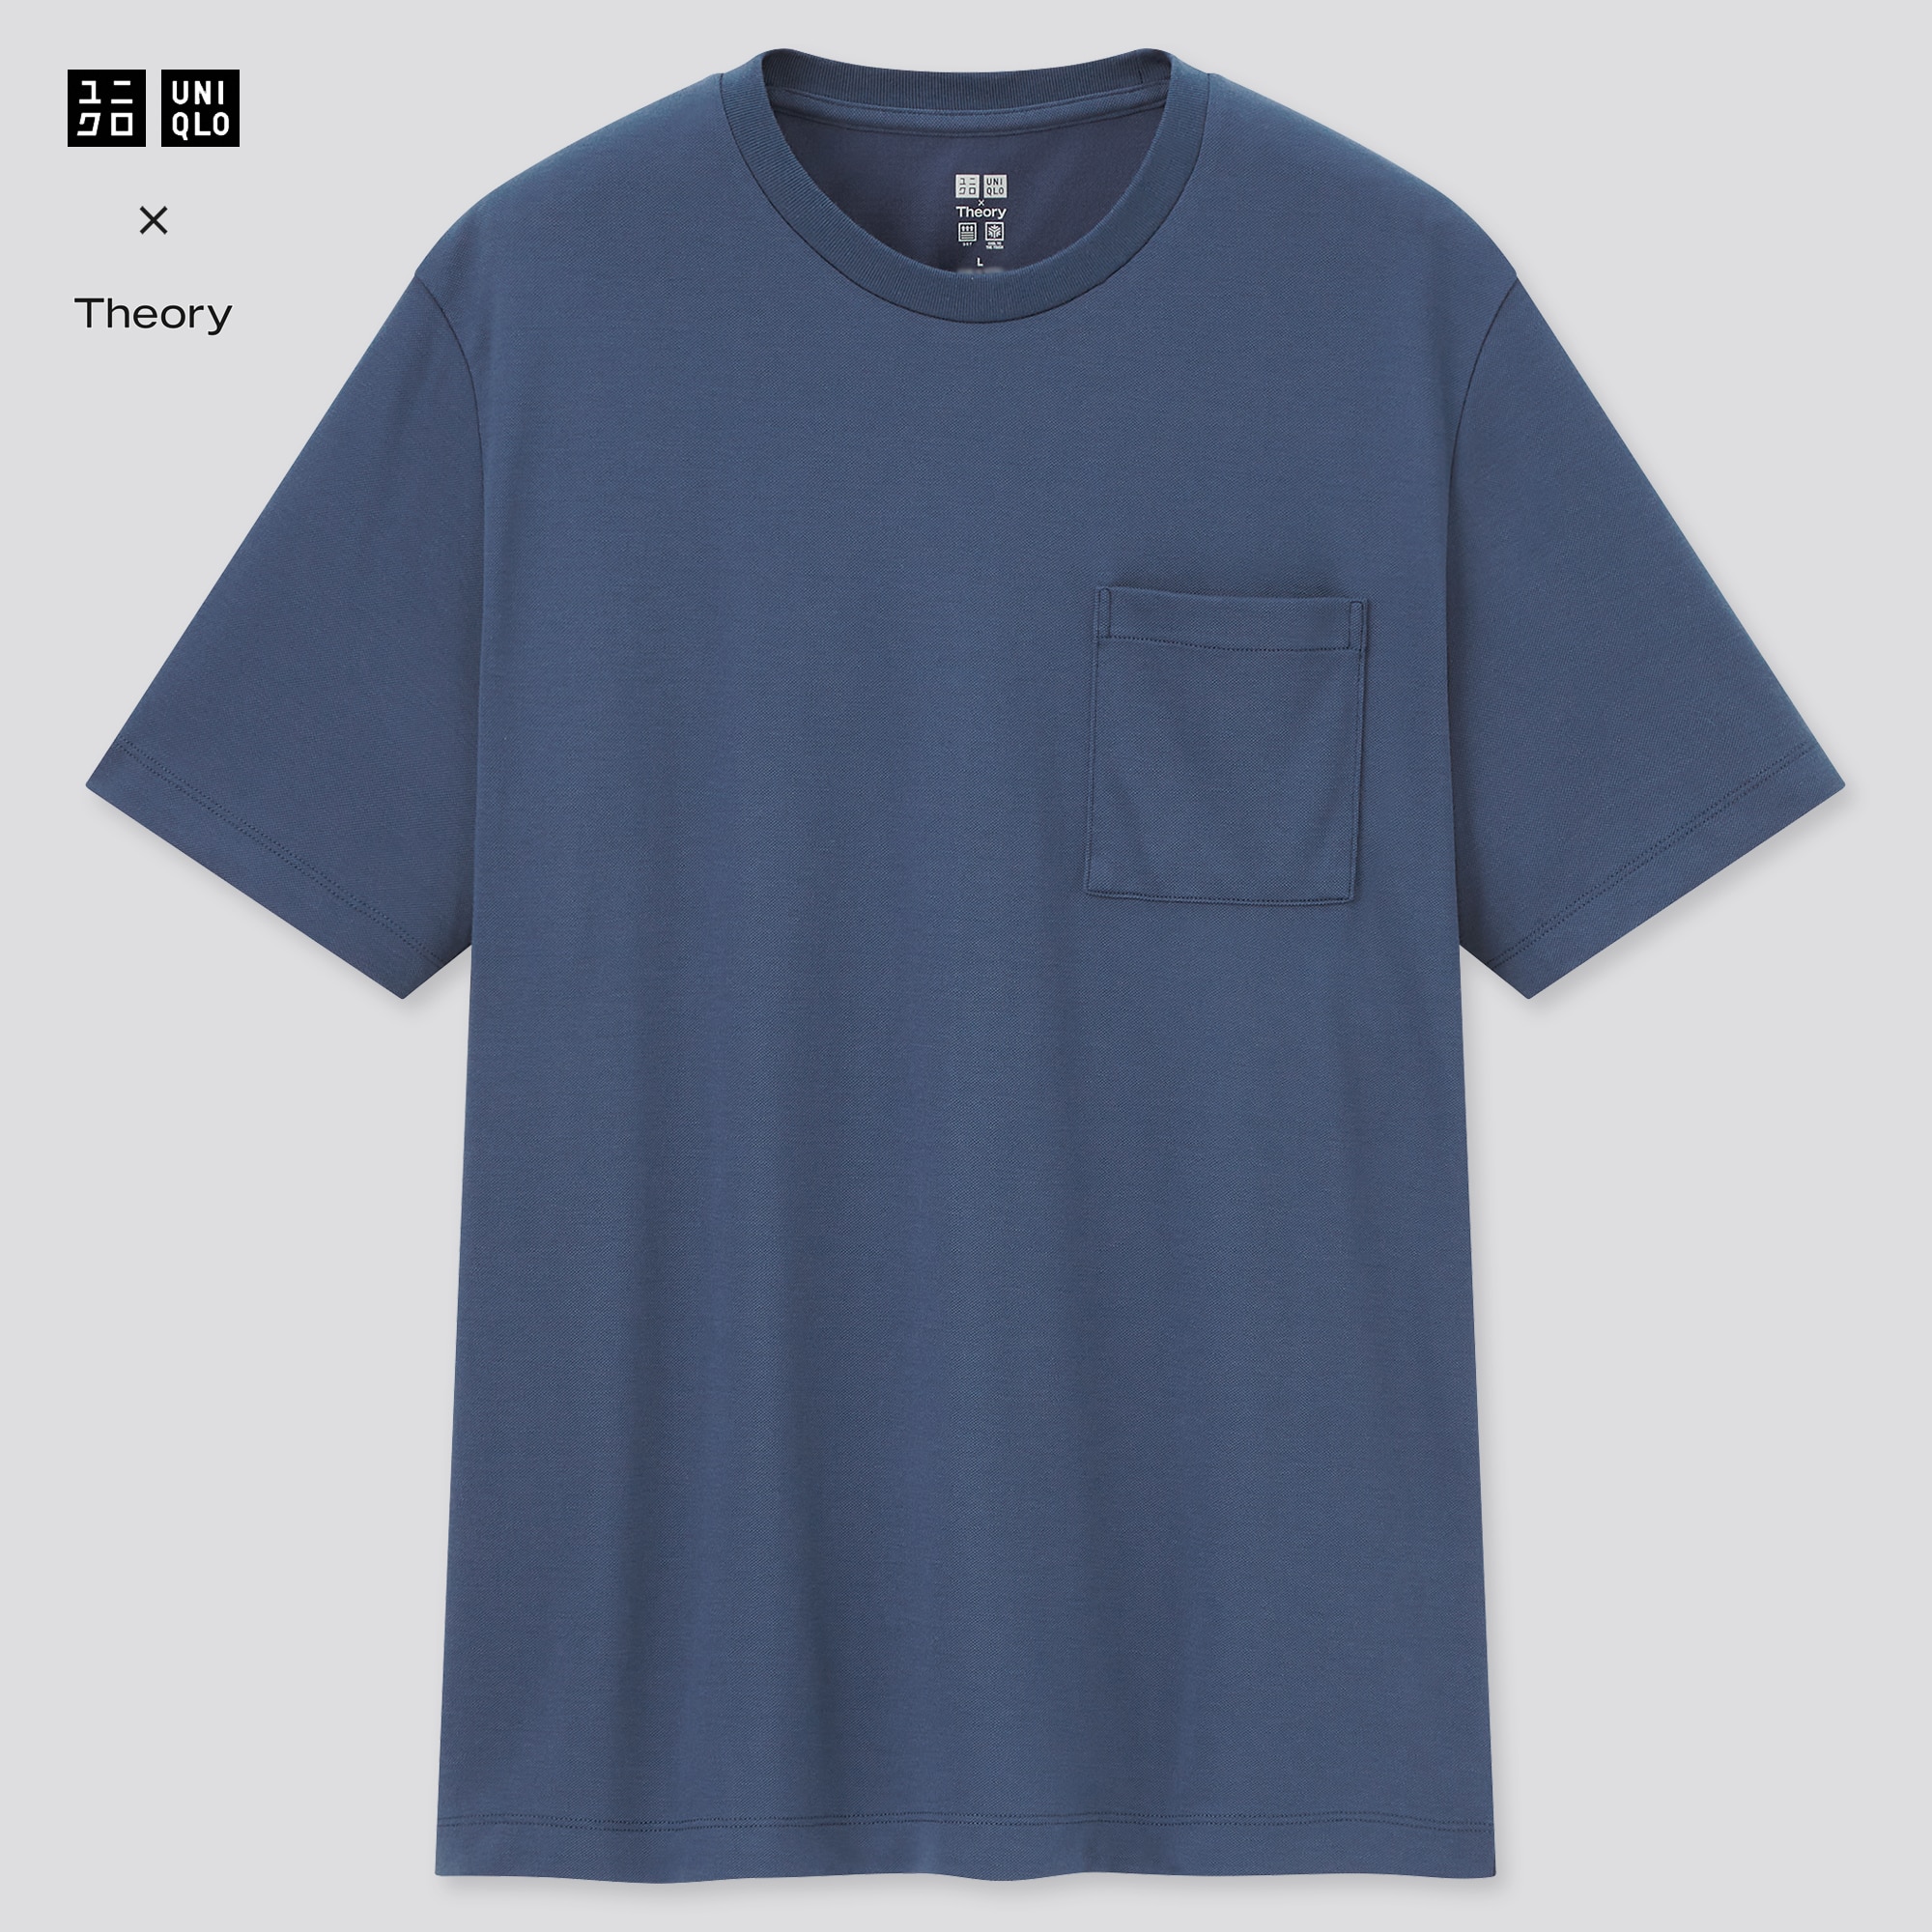 AIRism Pique Slim-Fit Short-Sleeve T-Shirt (Theory)